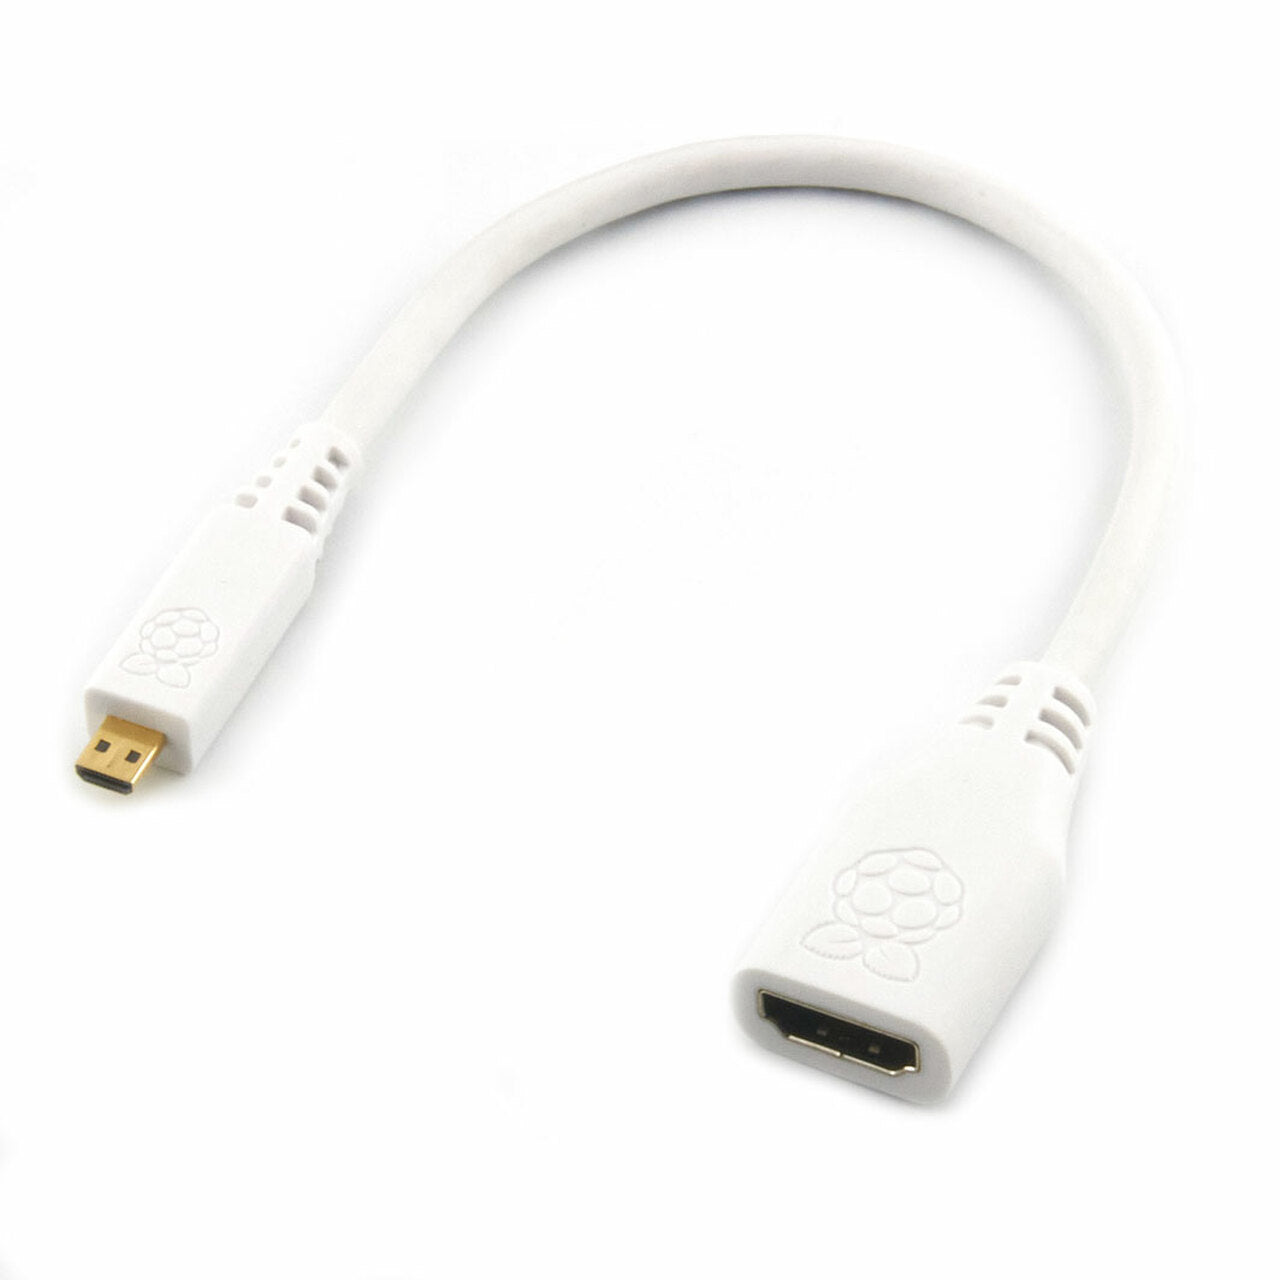 Official Raspberry Pi Micro HDMI to Standard HDMI Adapter, White